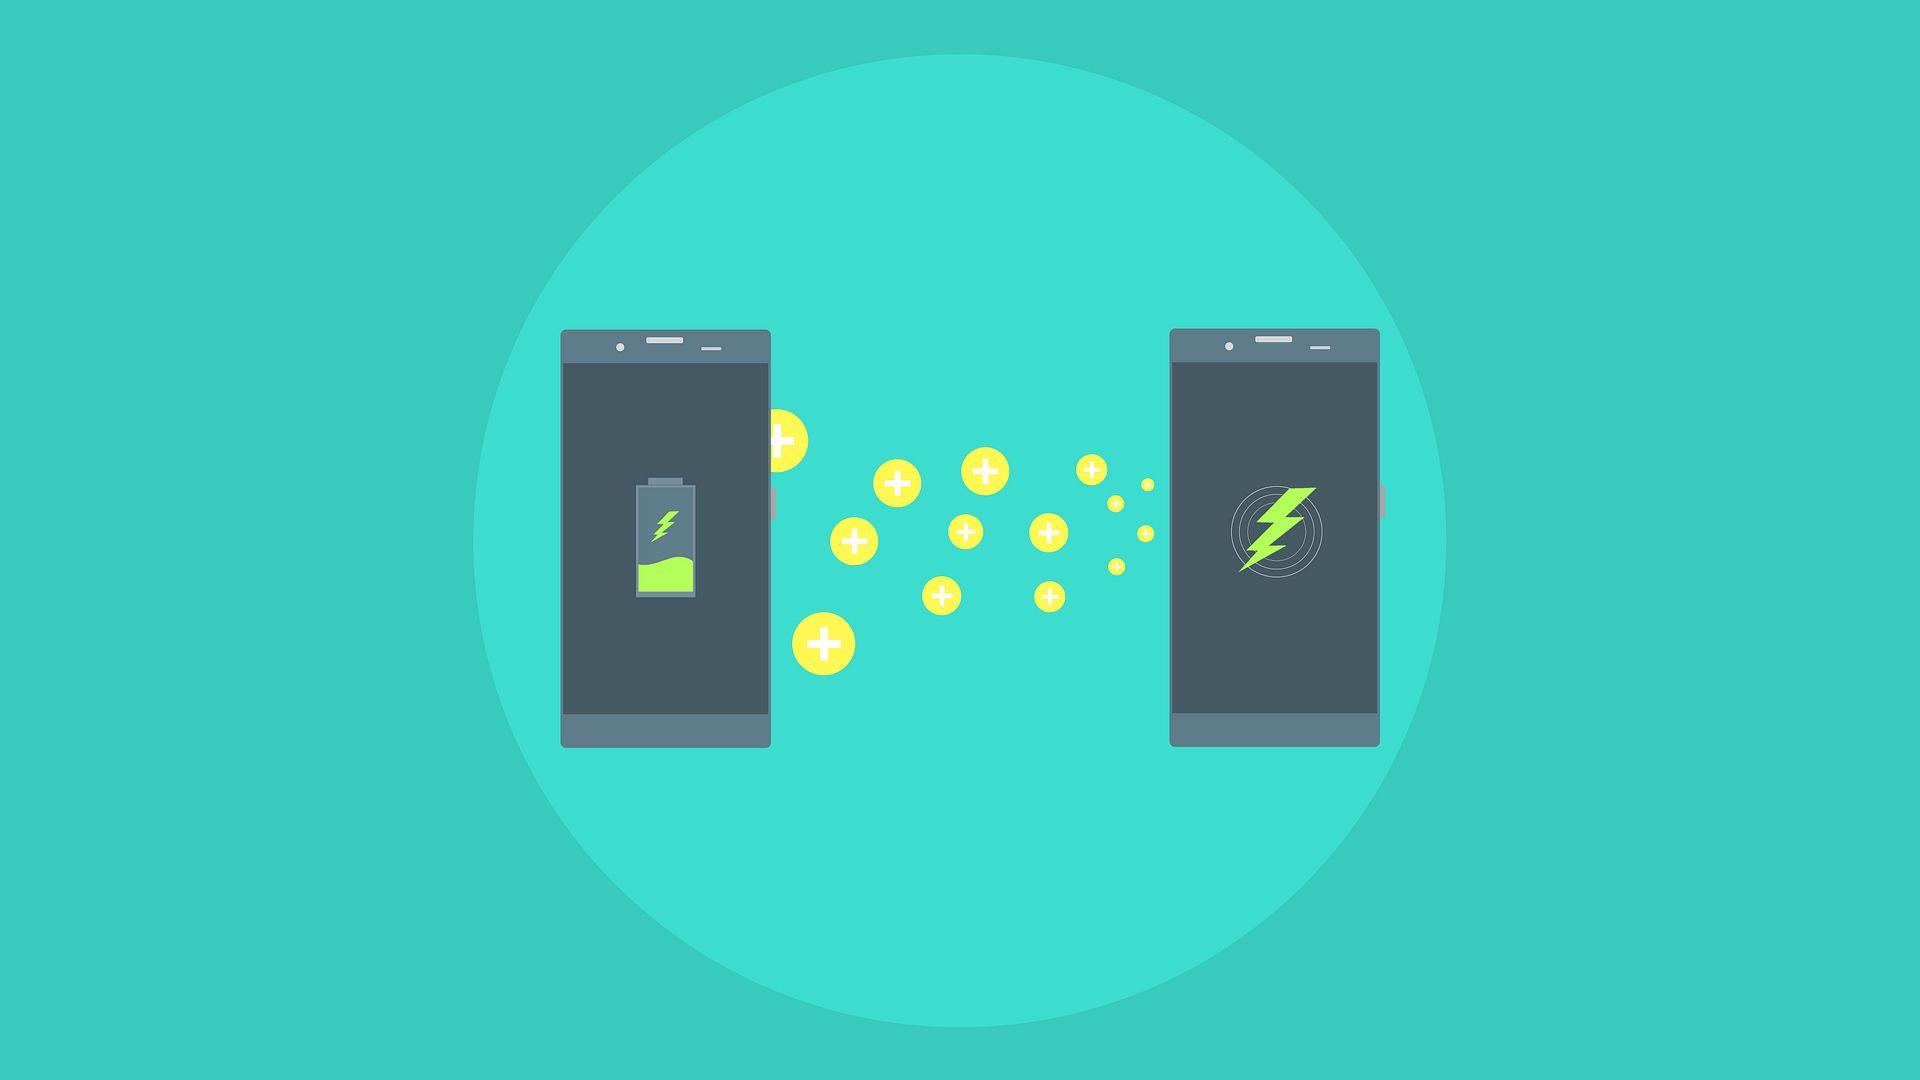 Two phones with battery and lightning bolt symbol on a blue green background.